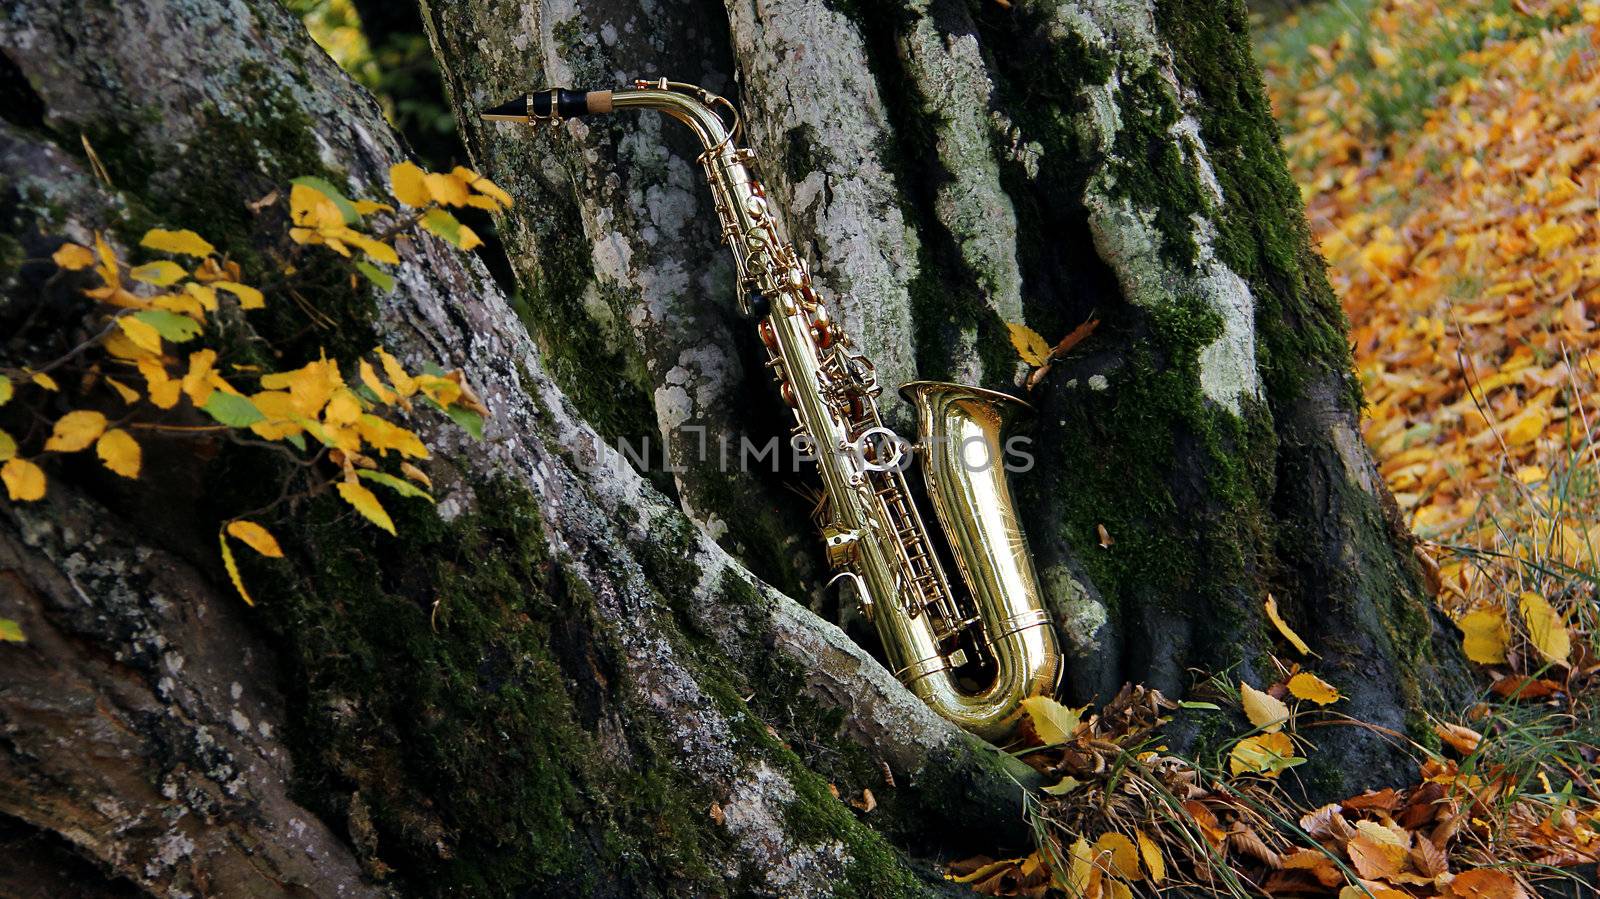 old grungy saxophone by Hasenonkel